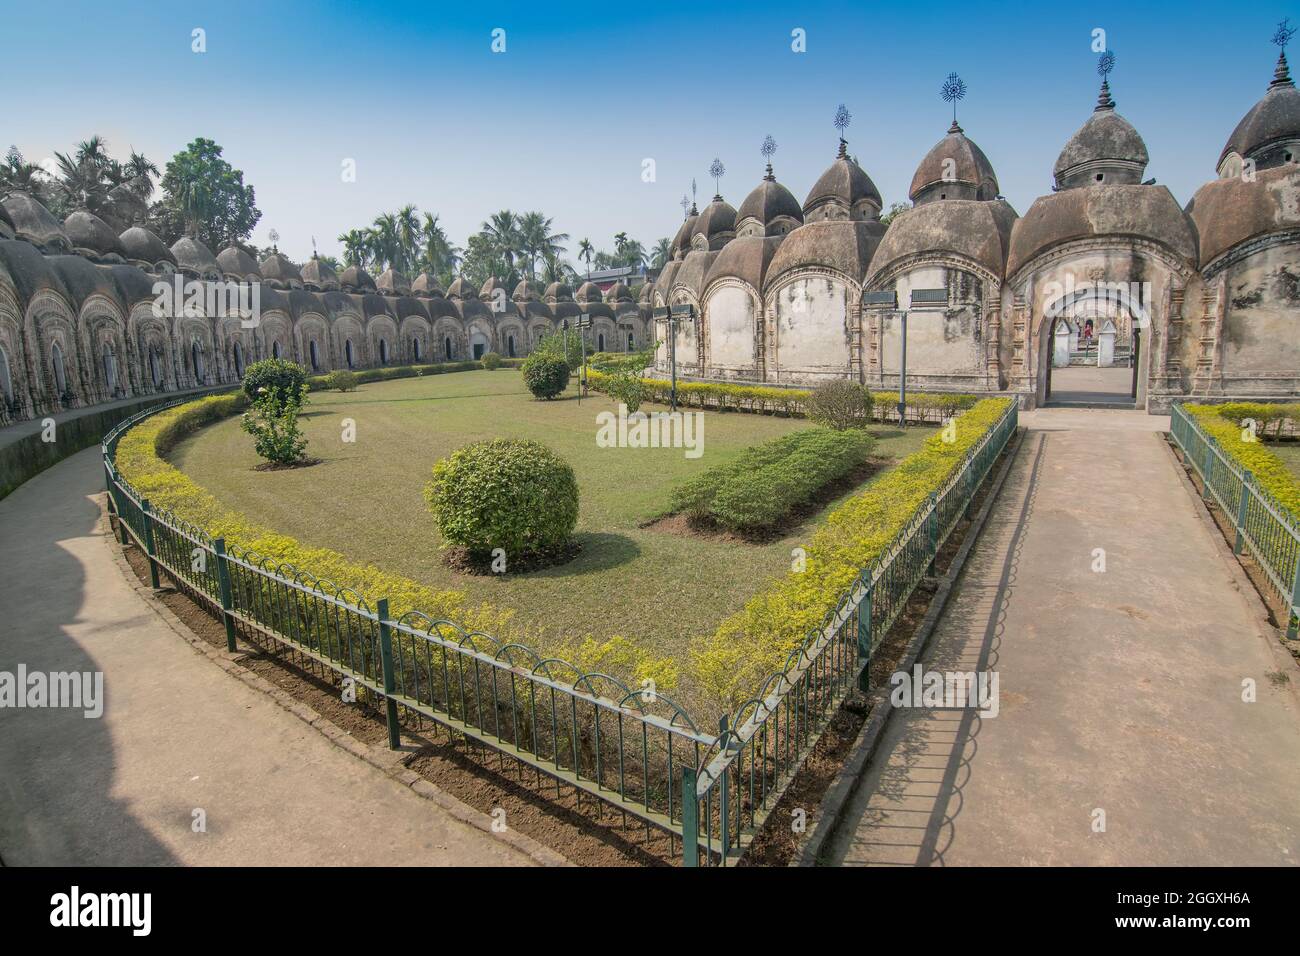 108 Shiva Temples of Kalna, Burdwan , West Bengal. A total of 108 temples of Lord Shiva (a Hindu God), are arranged in two concentric circles. UNESCO. Stock Photo